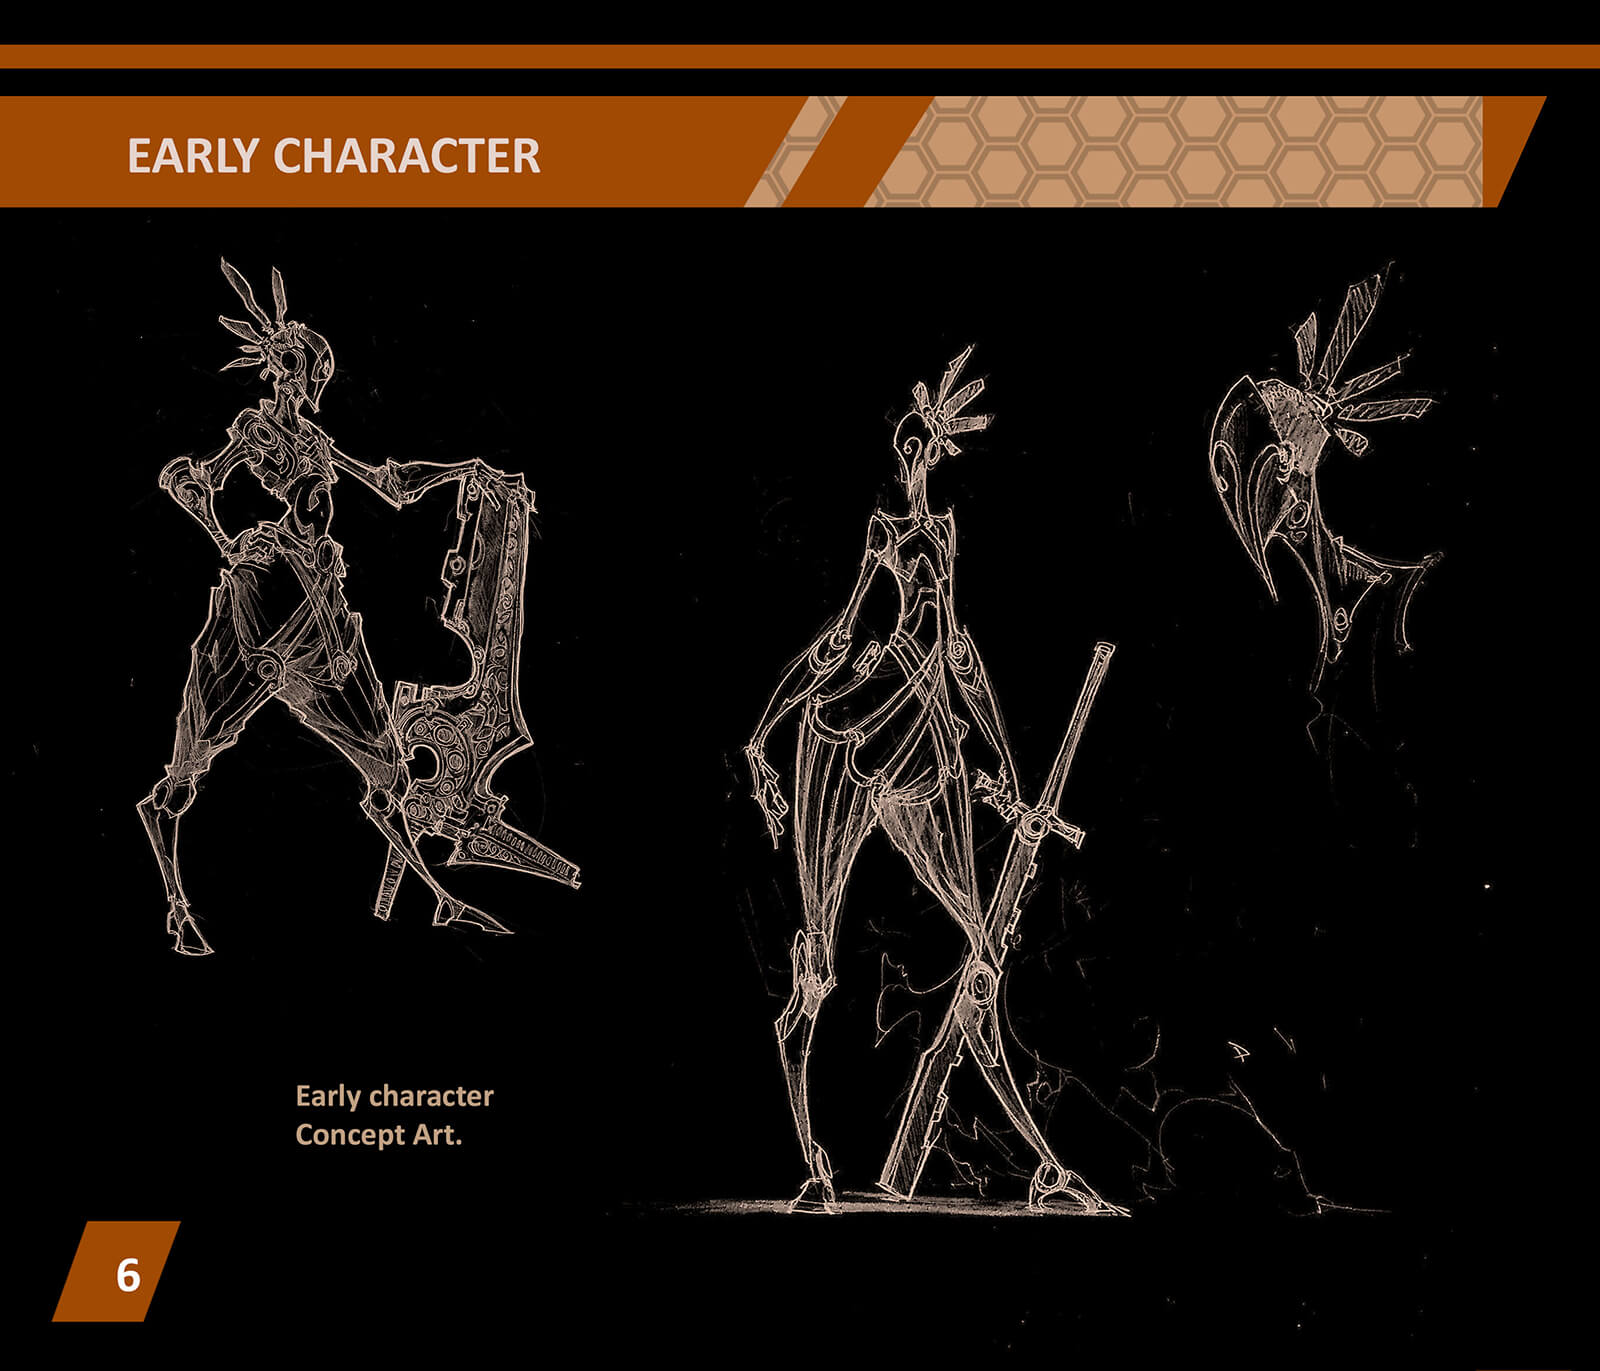 Character design concept sketches, a stylized warrior in ornate armor holds elaborate melee weapons